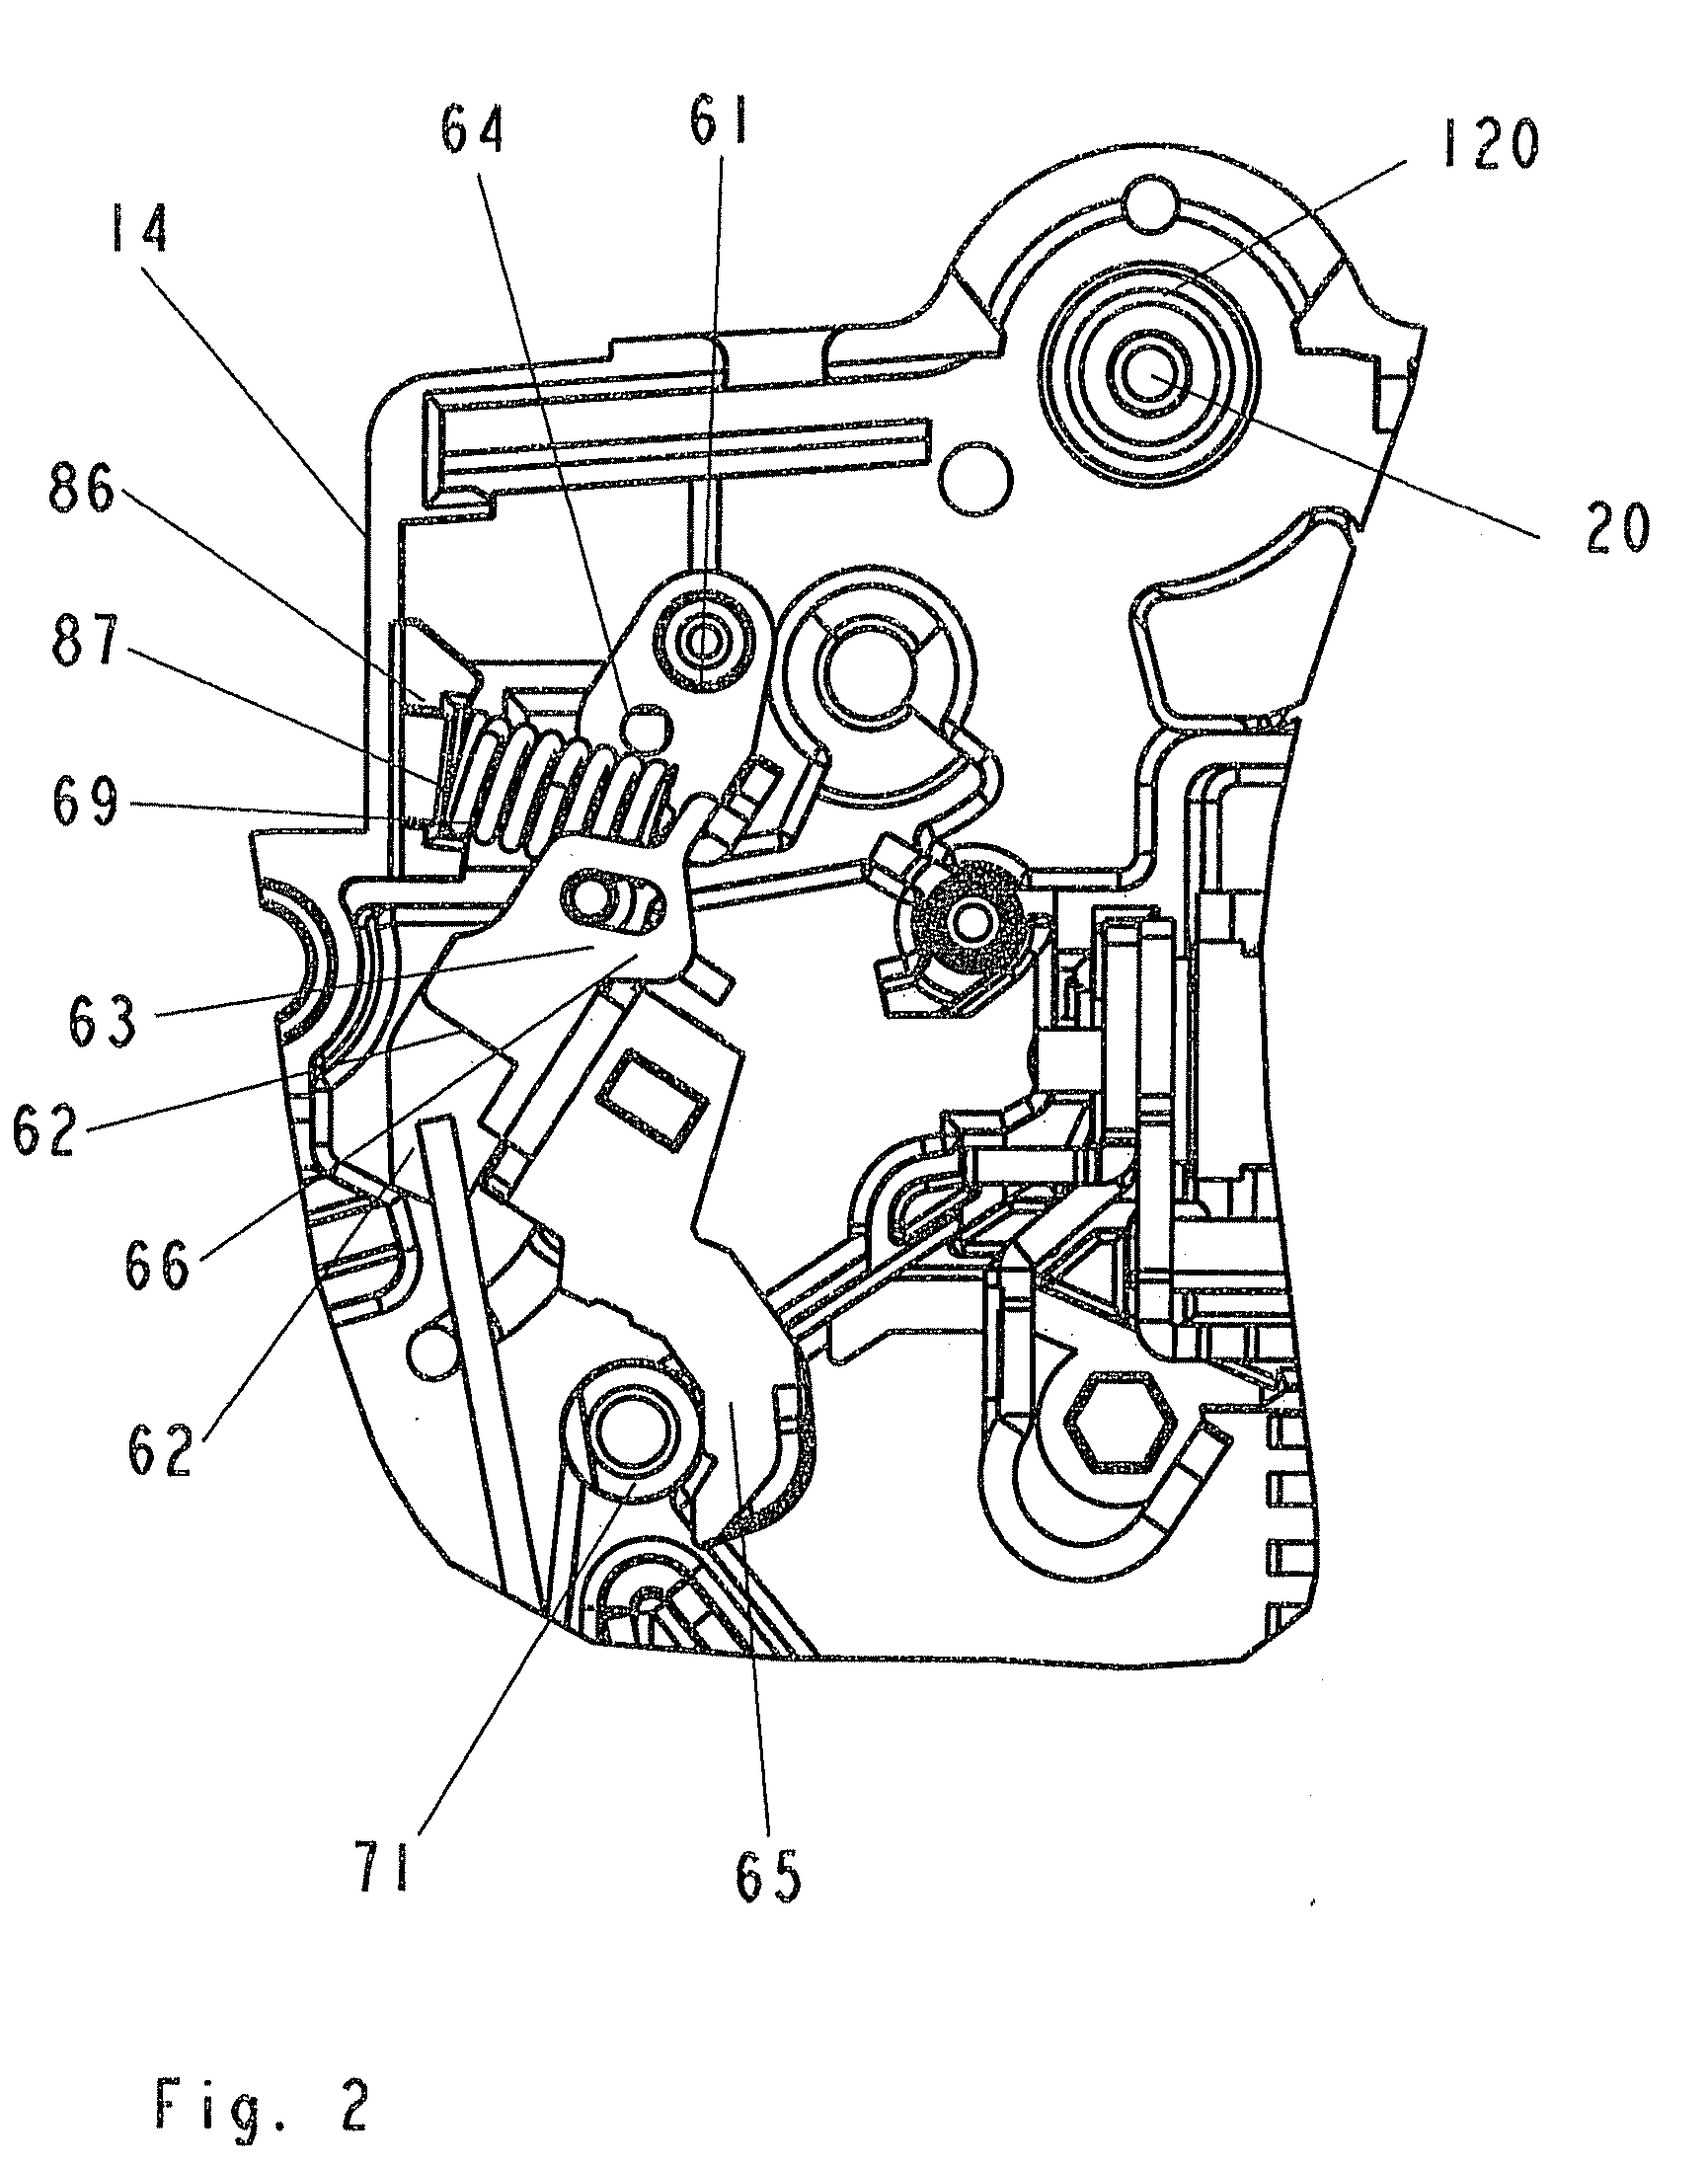 Electrical service switching device